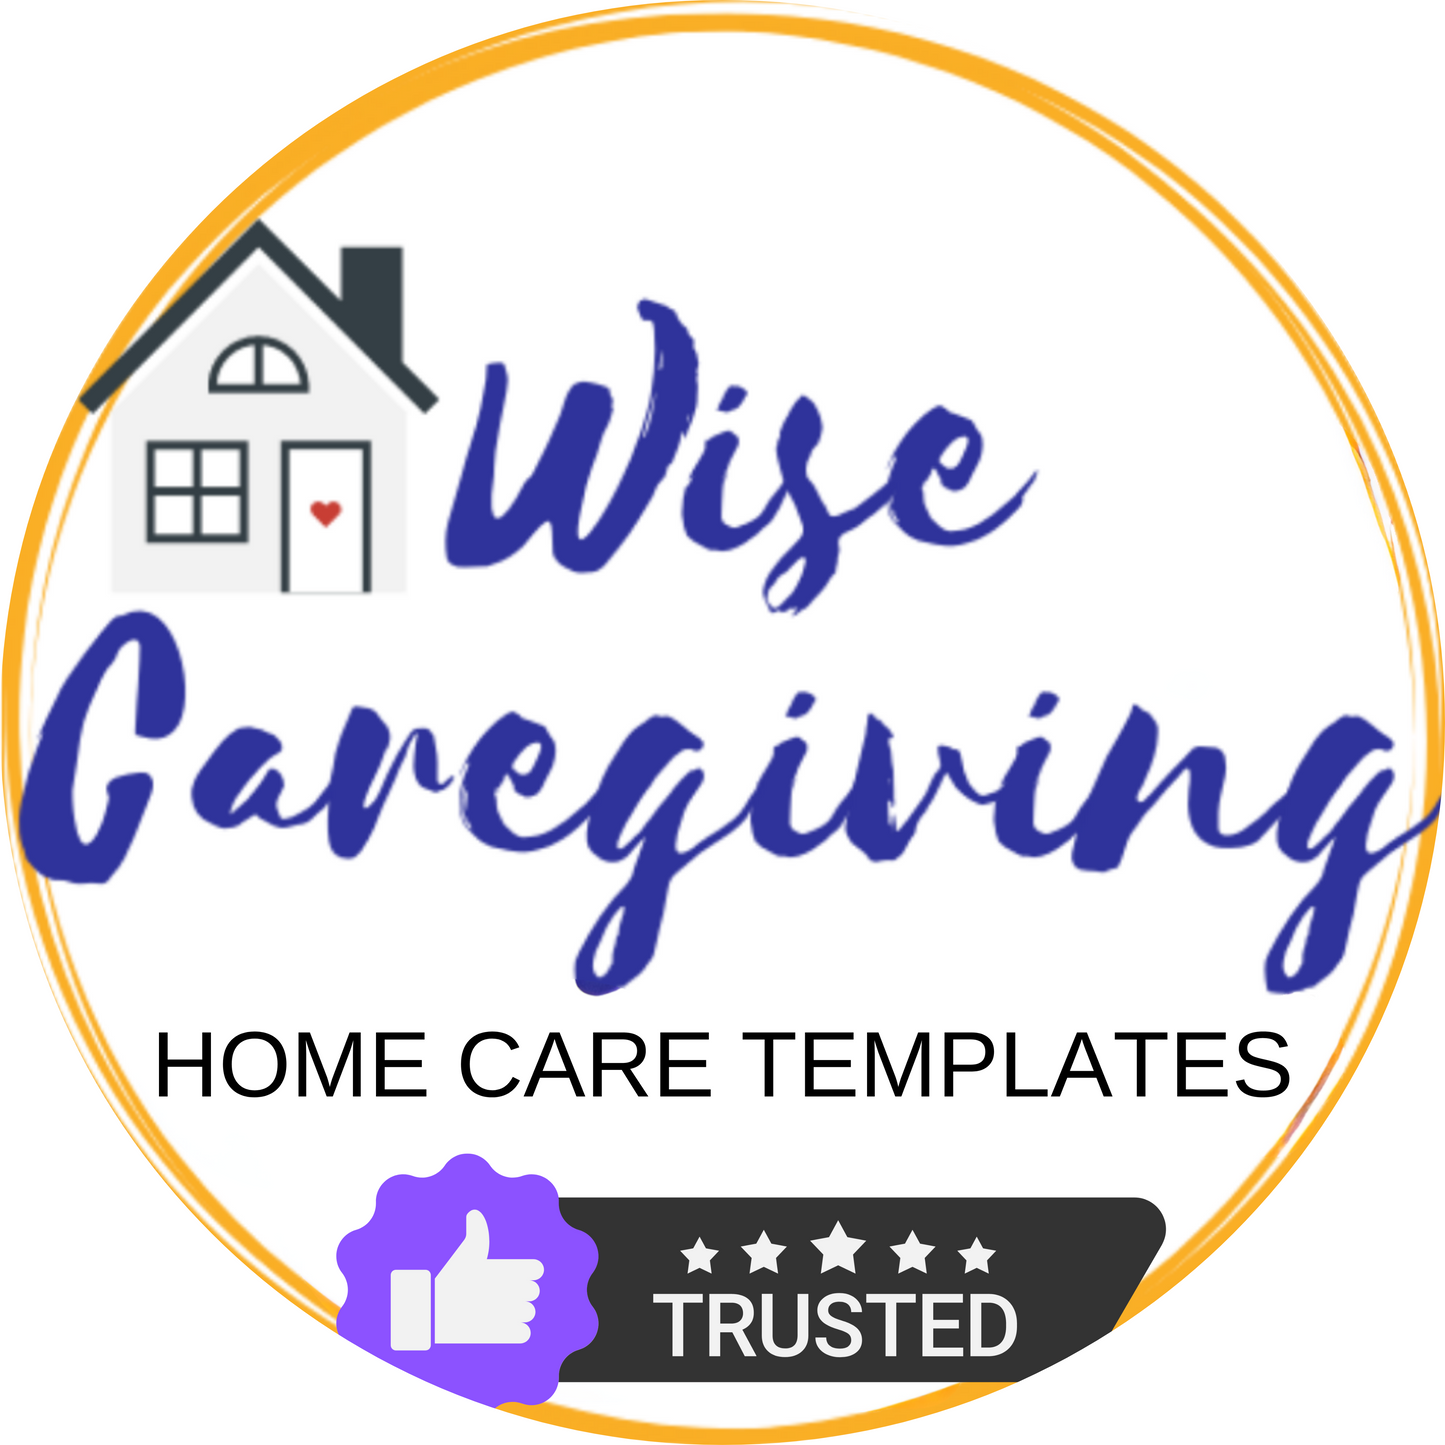 Home Care Independent Contractor Template